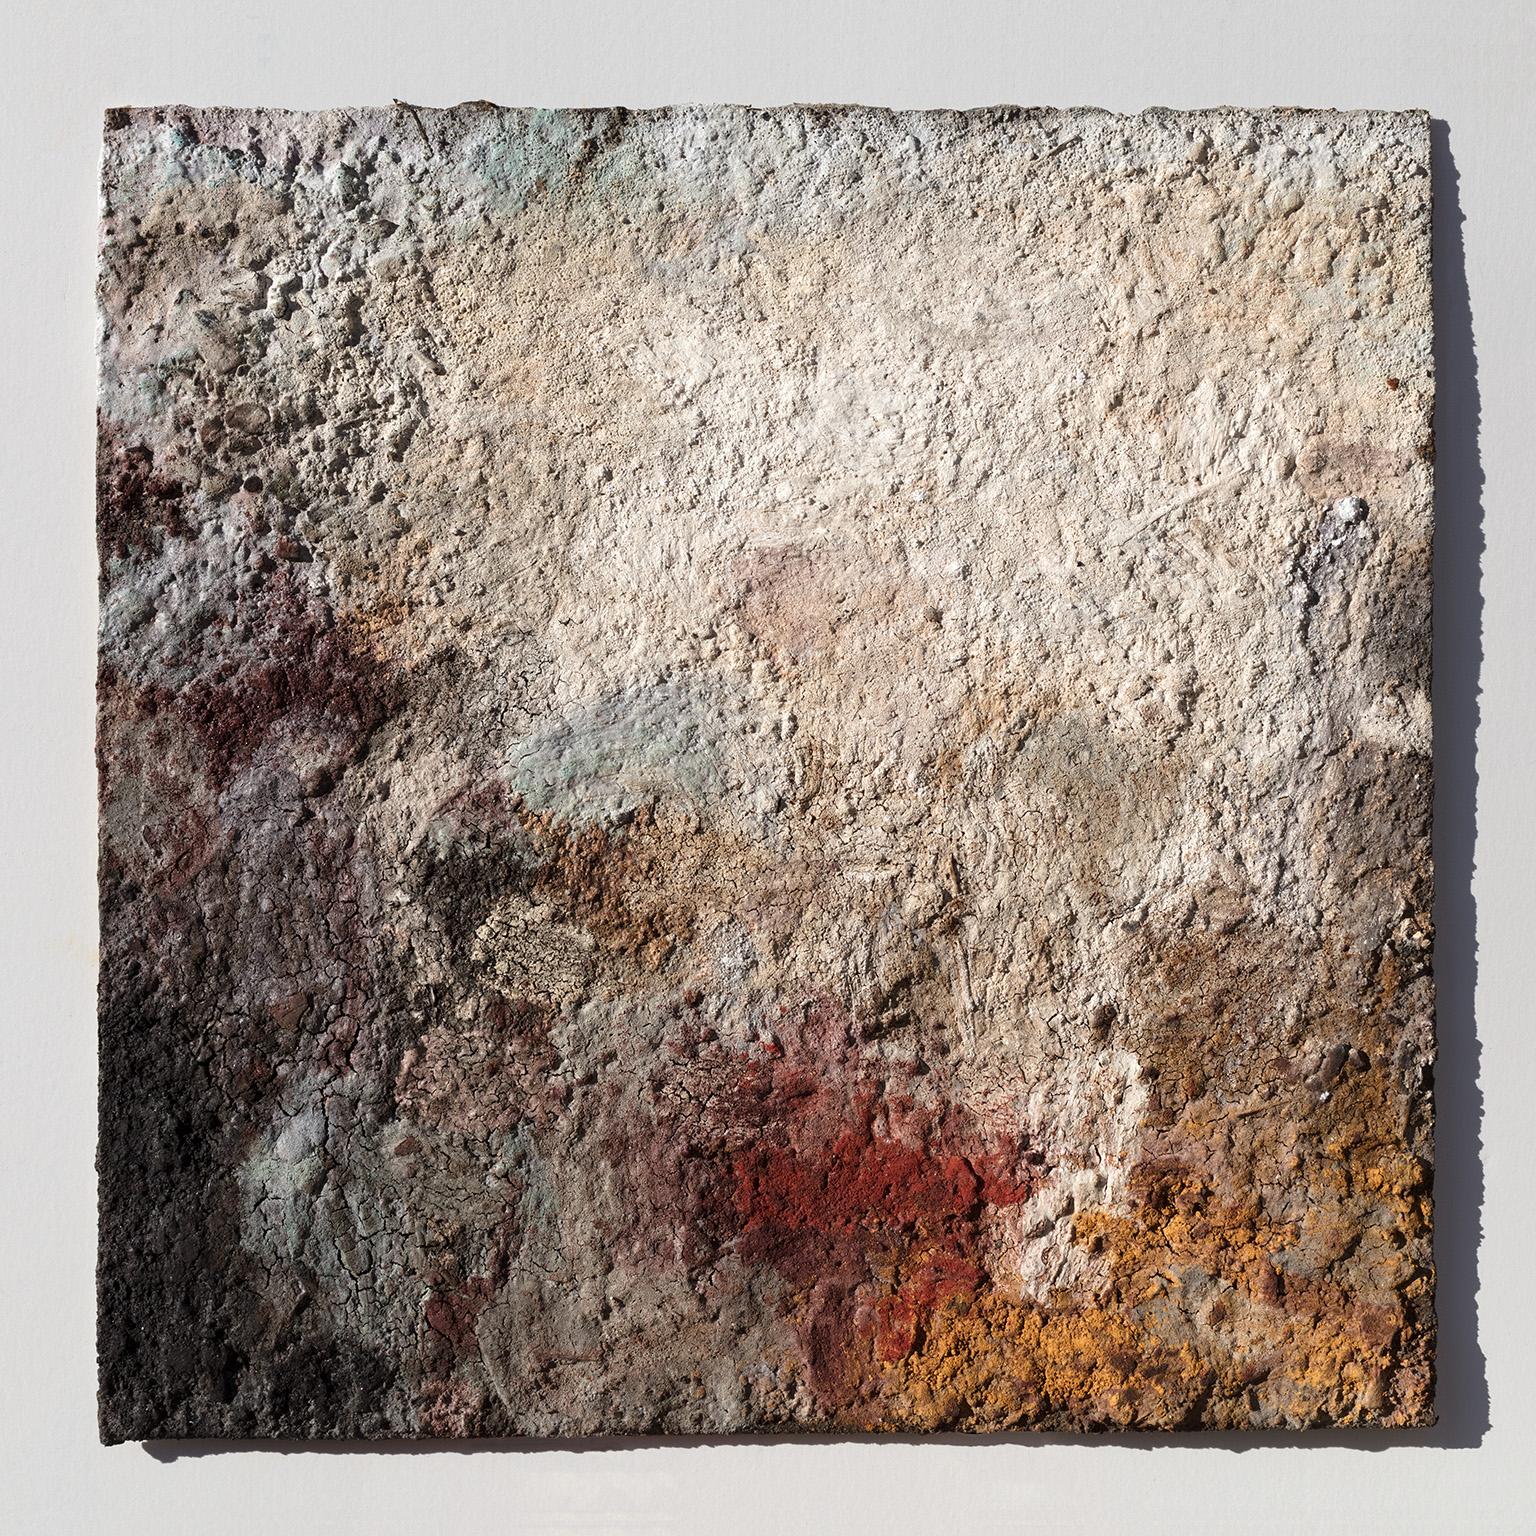 Terra Bruciata (Scorched Earth) - Small Abstract Painting with Raw Pigments